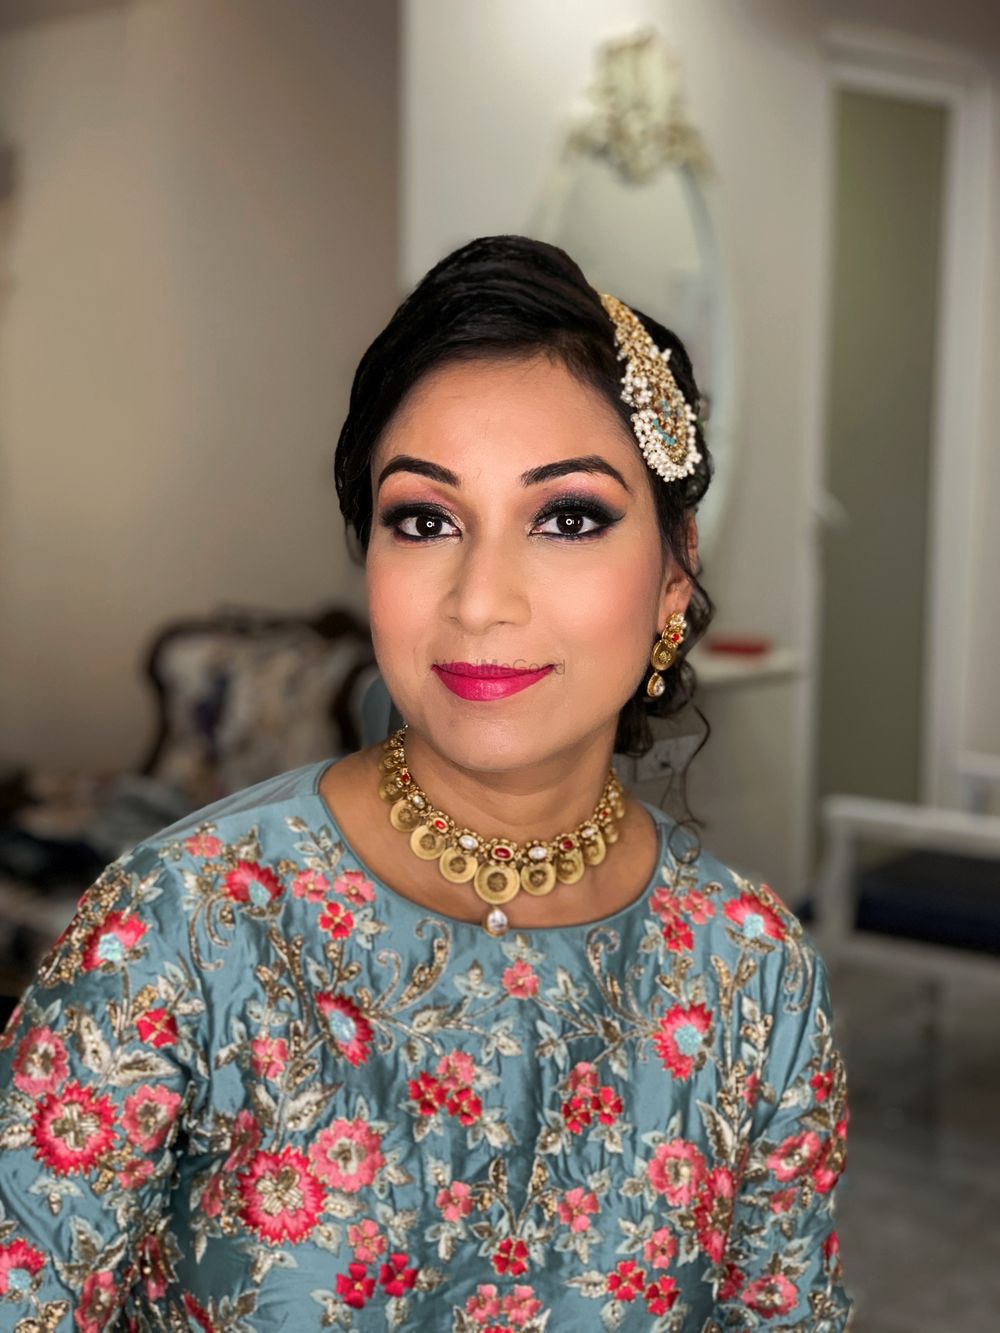 Photo From Richa  - By Tanvi KG Makeup